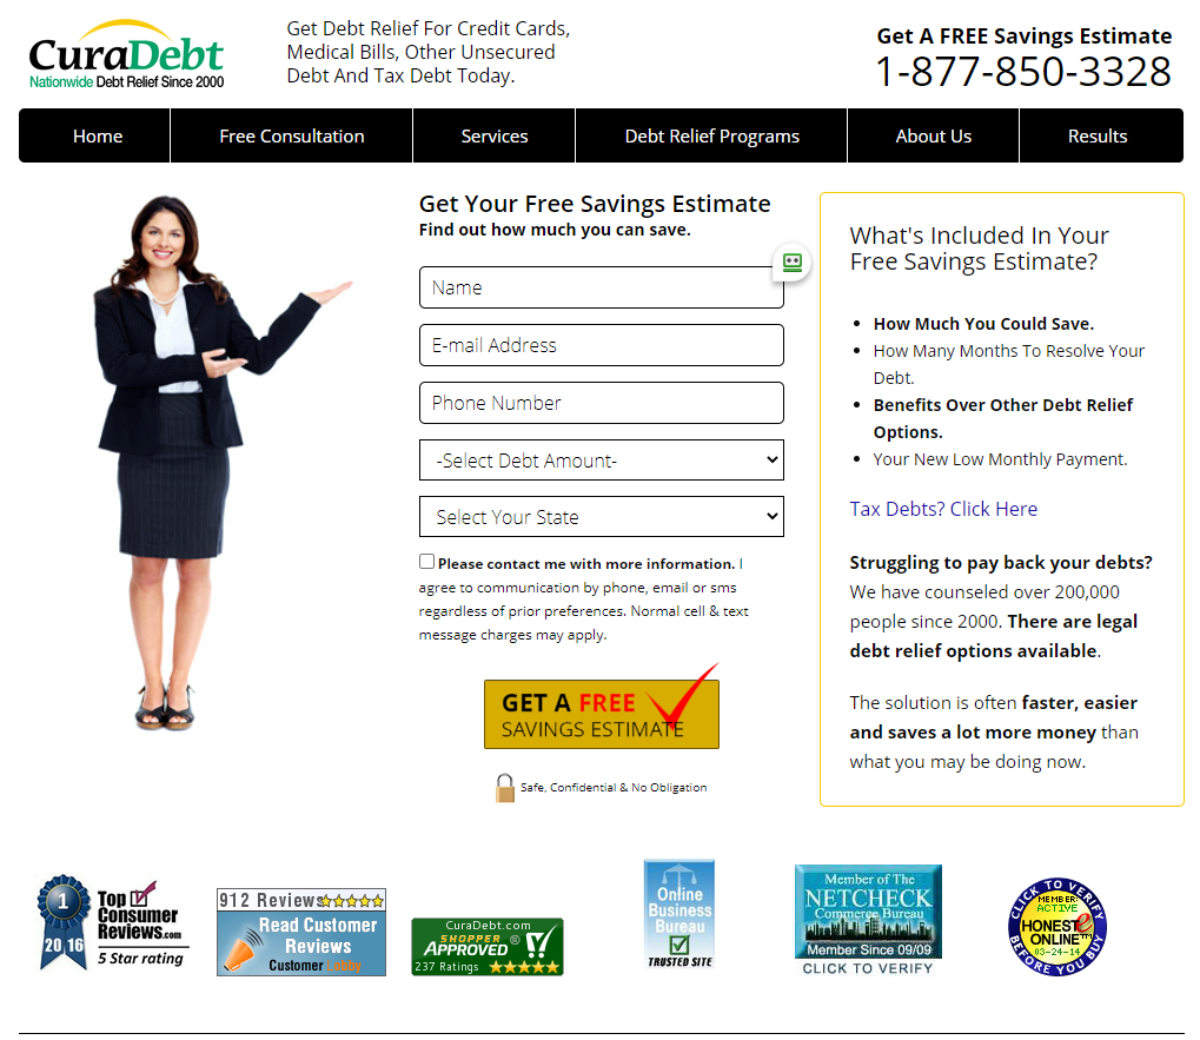 This is a screenshot taken from the Curadebt.com website where people can help with IRS tax debt relief. 